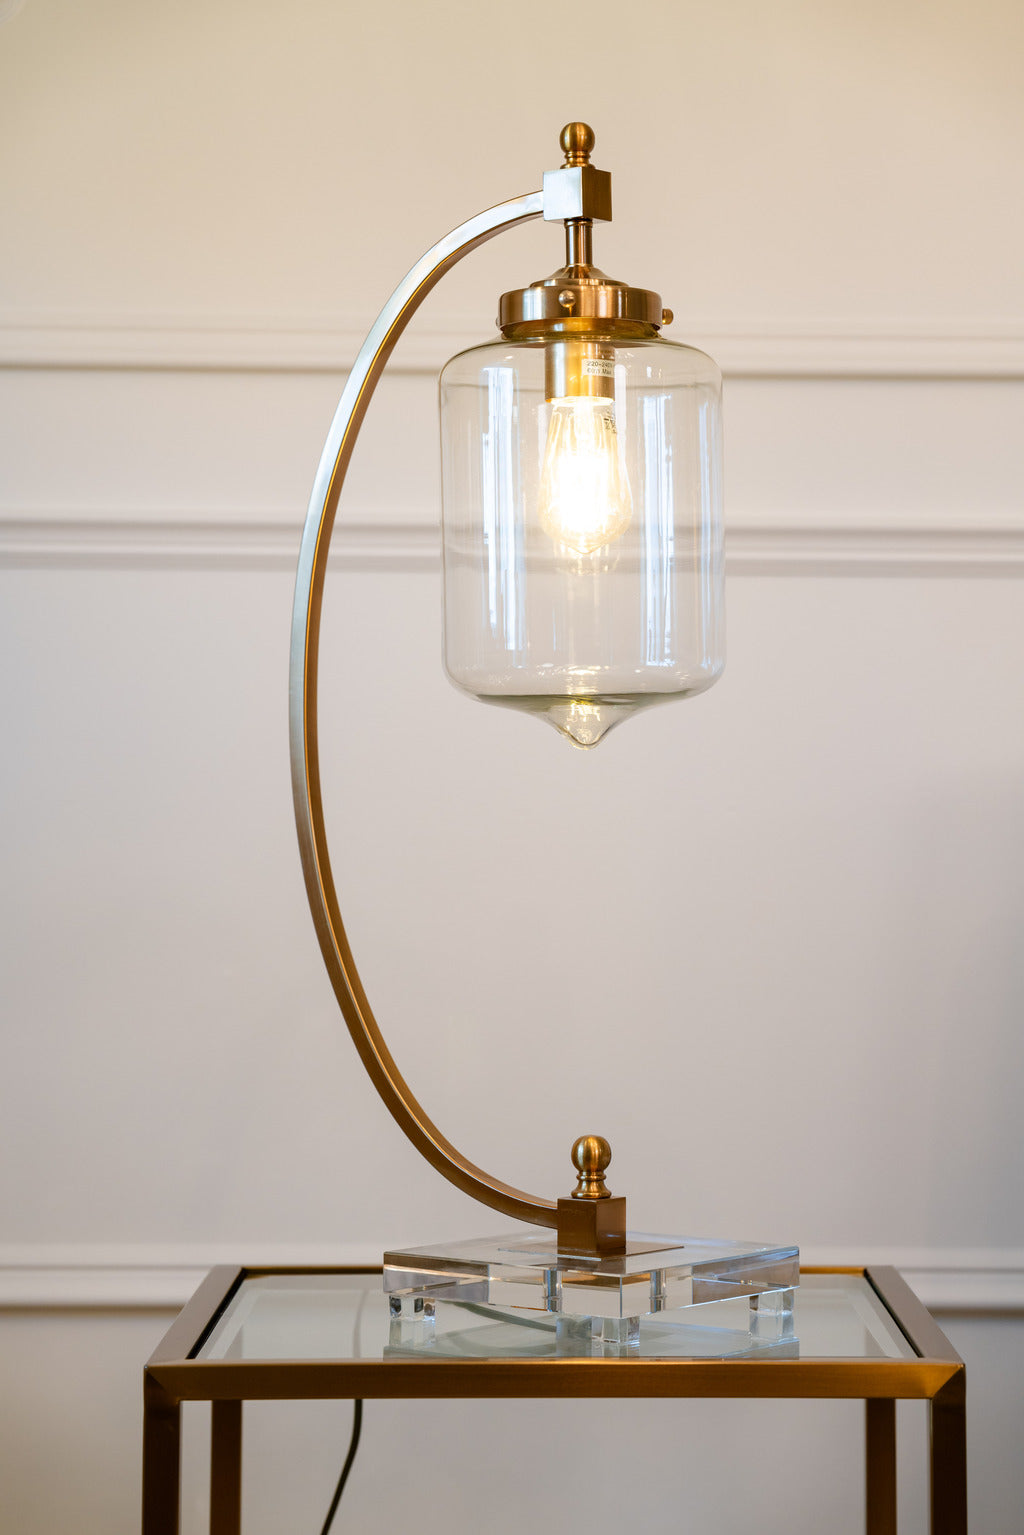 Gold table lamp, gold furniture, Bulb lamp, glass lamp, Table Lamps